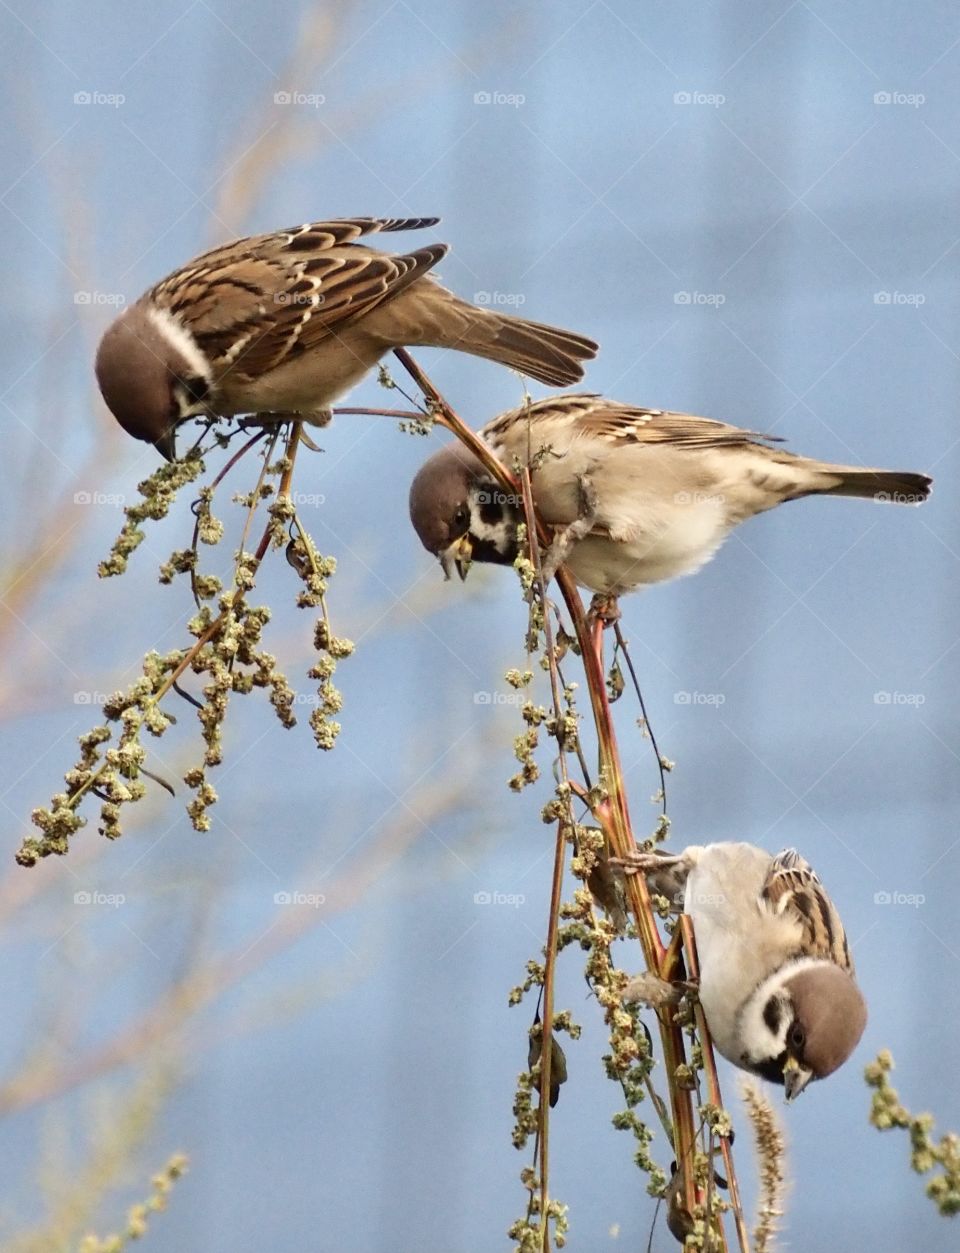 Sparrows on the grass